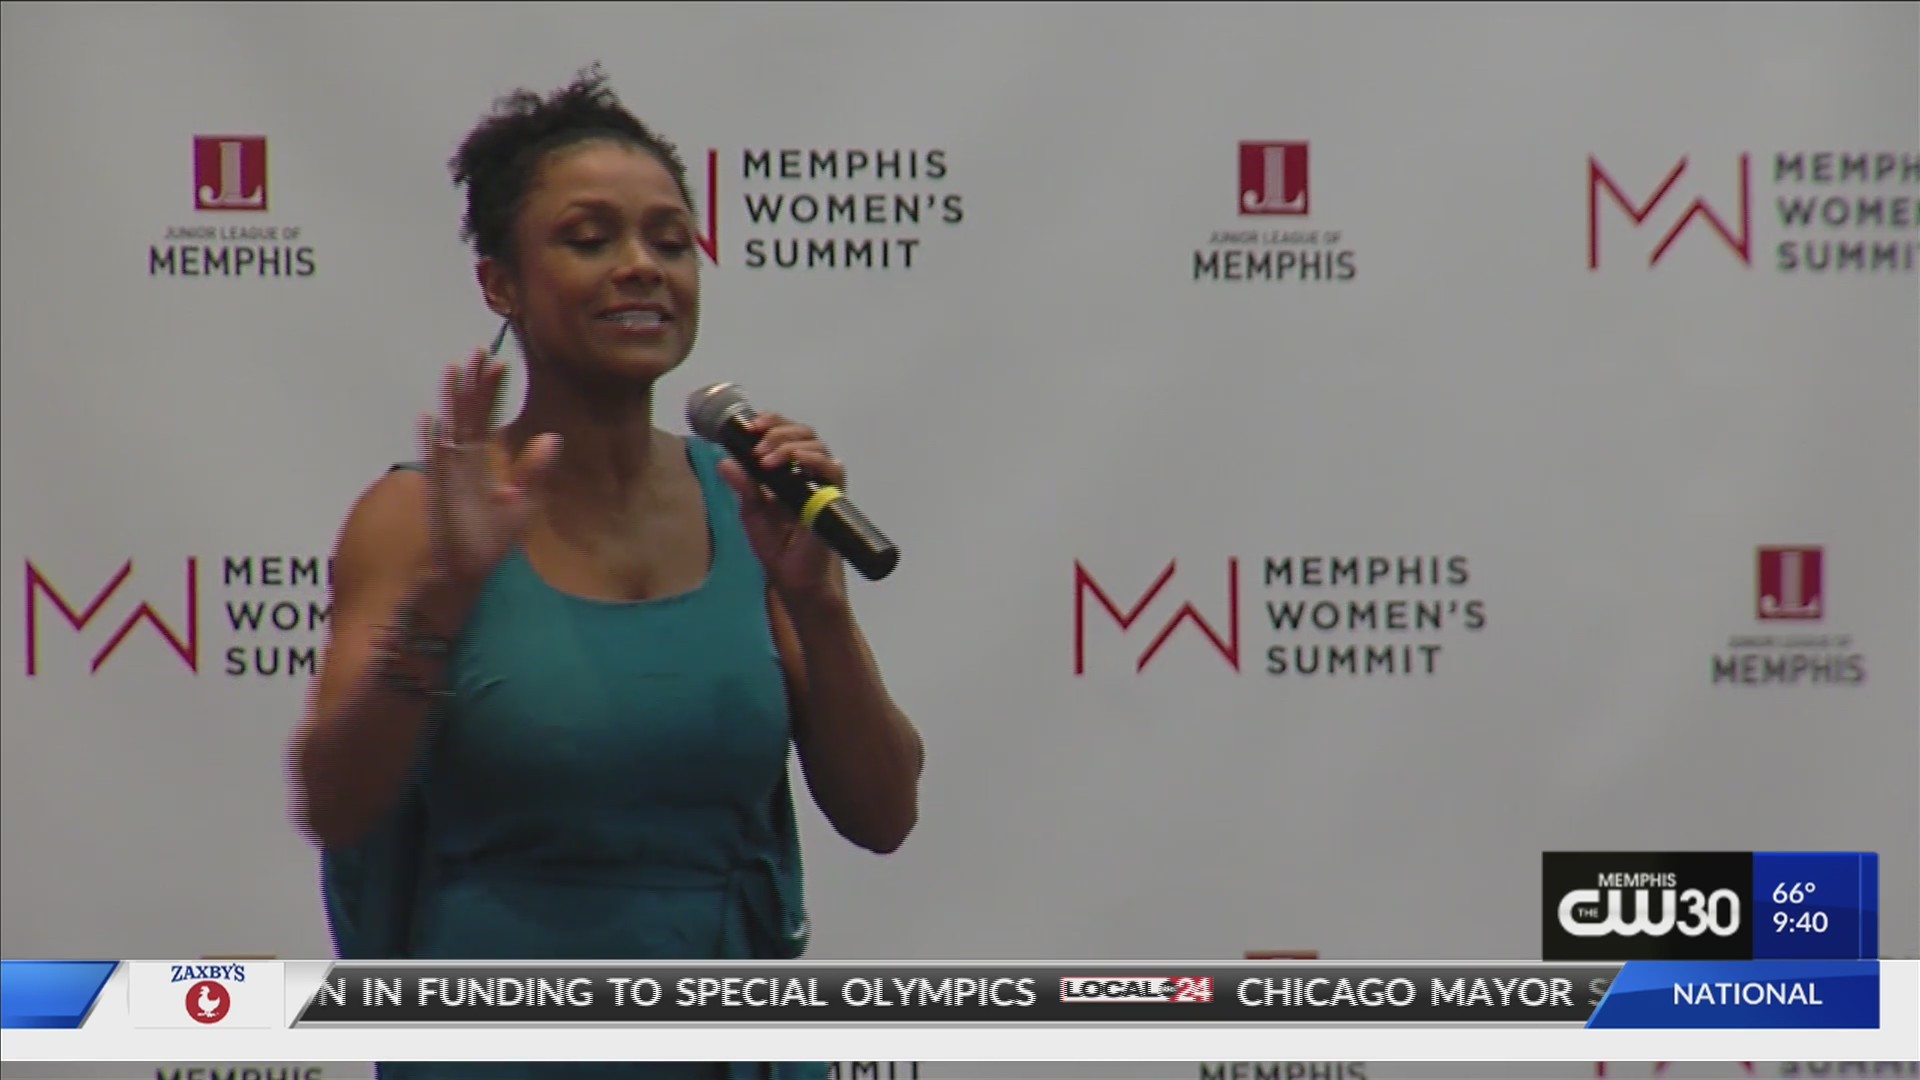 Olympic Gold Medalist Dominique Dawes Keynote Speaker At Memphis Women's Summit